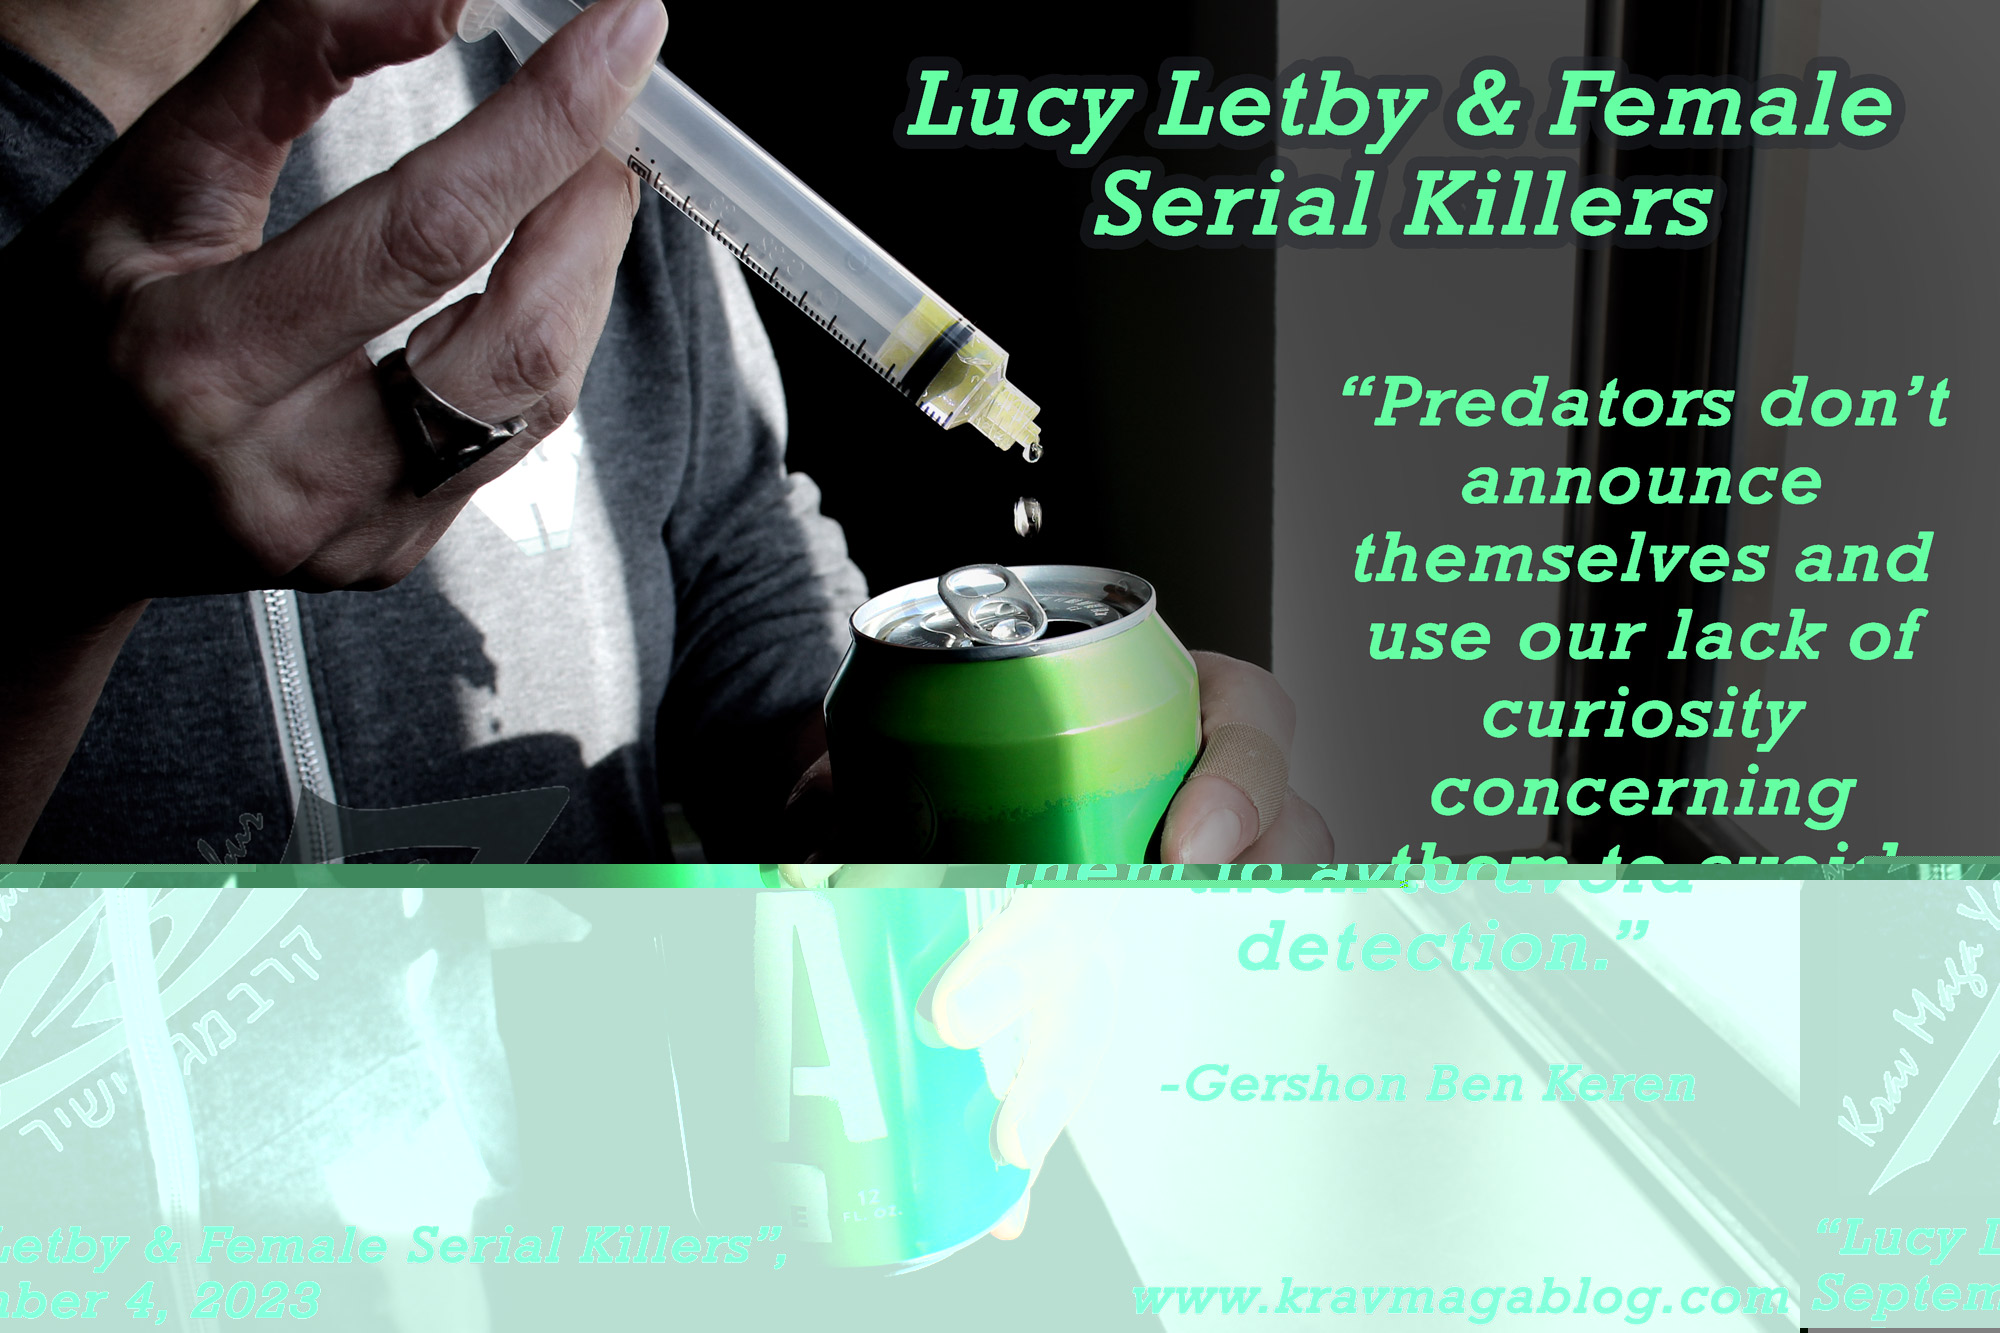 Lucy Letby & Female Serial Killers